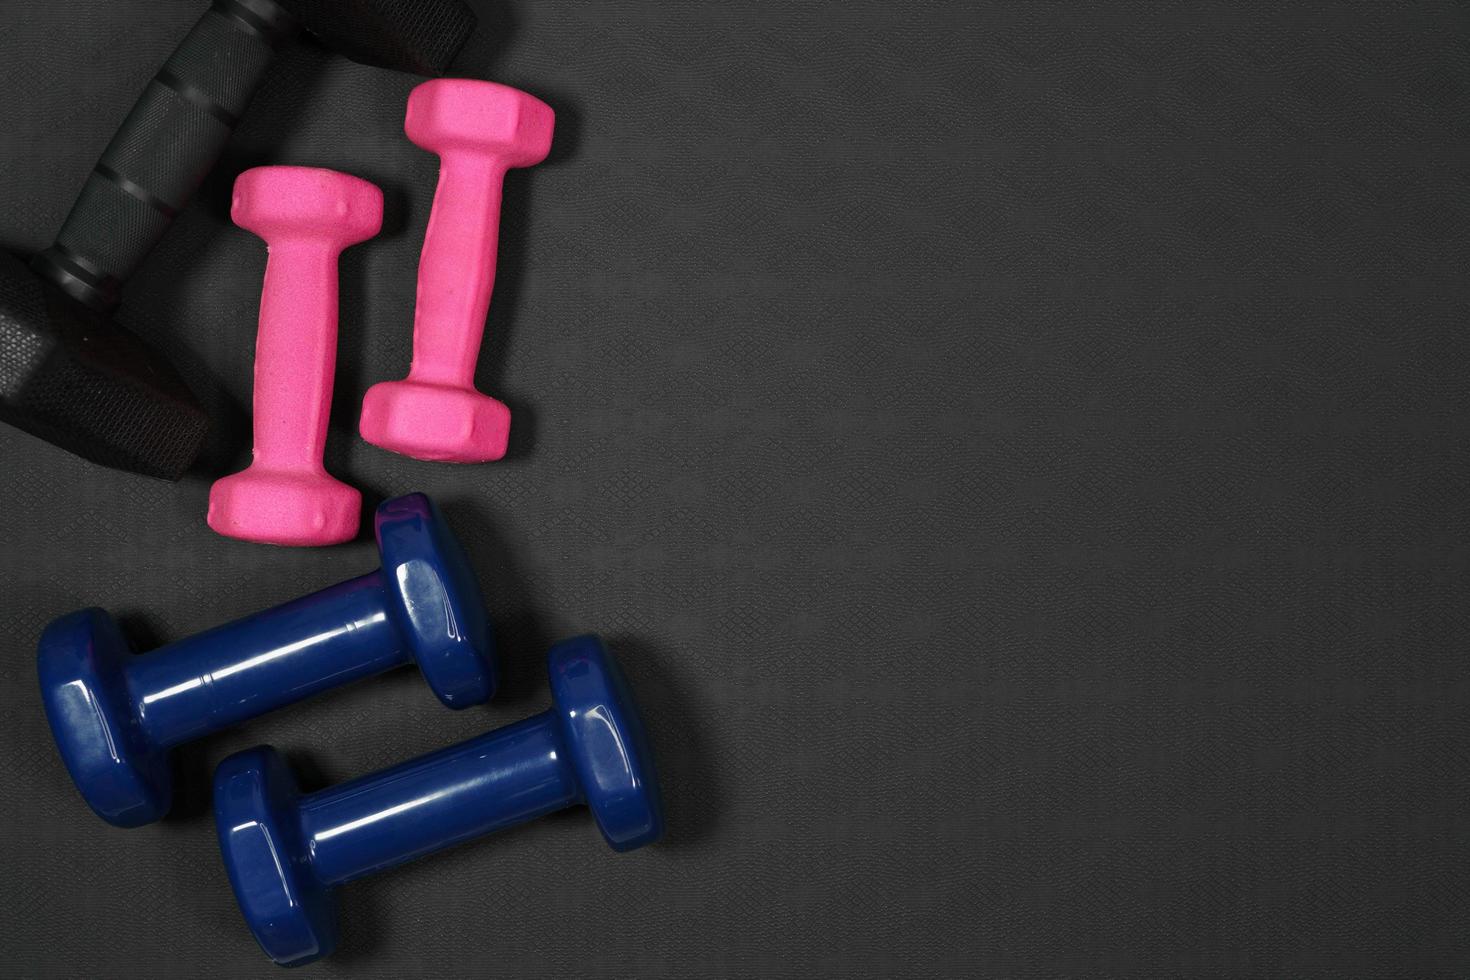 pink and black blue dumbbell background on black rubber background.fitness equipment background concept photo